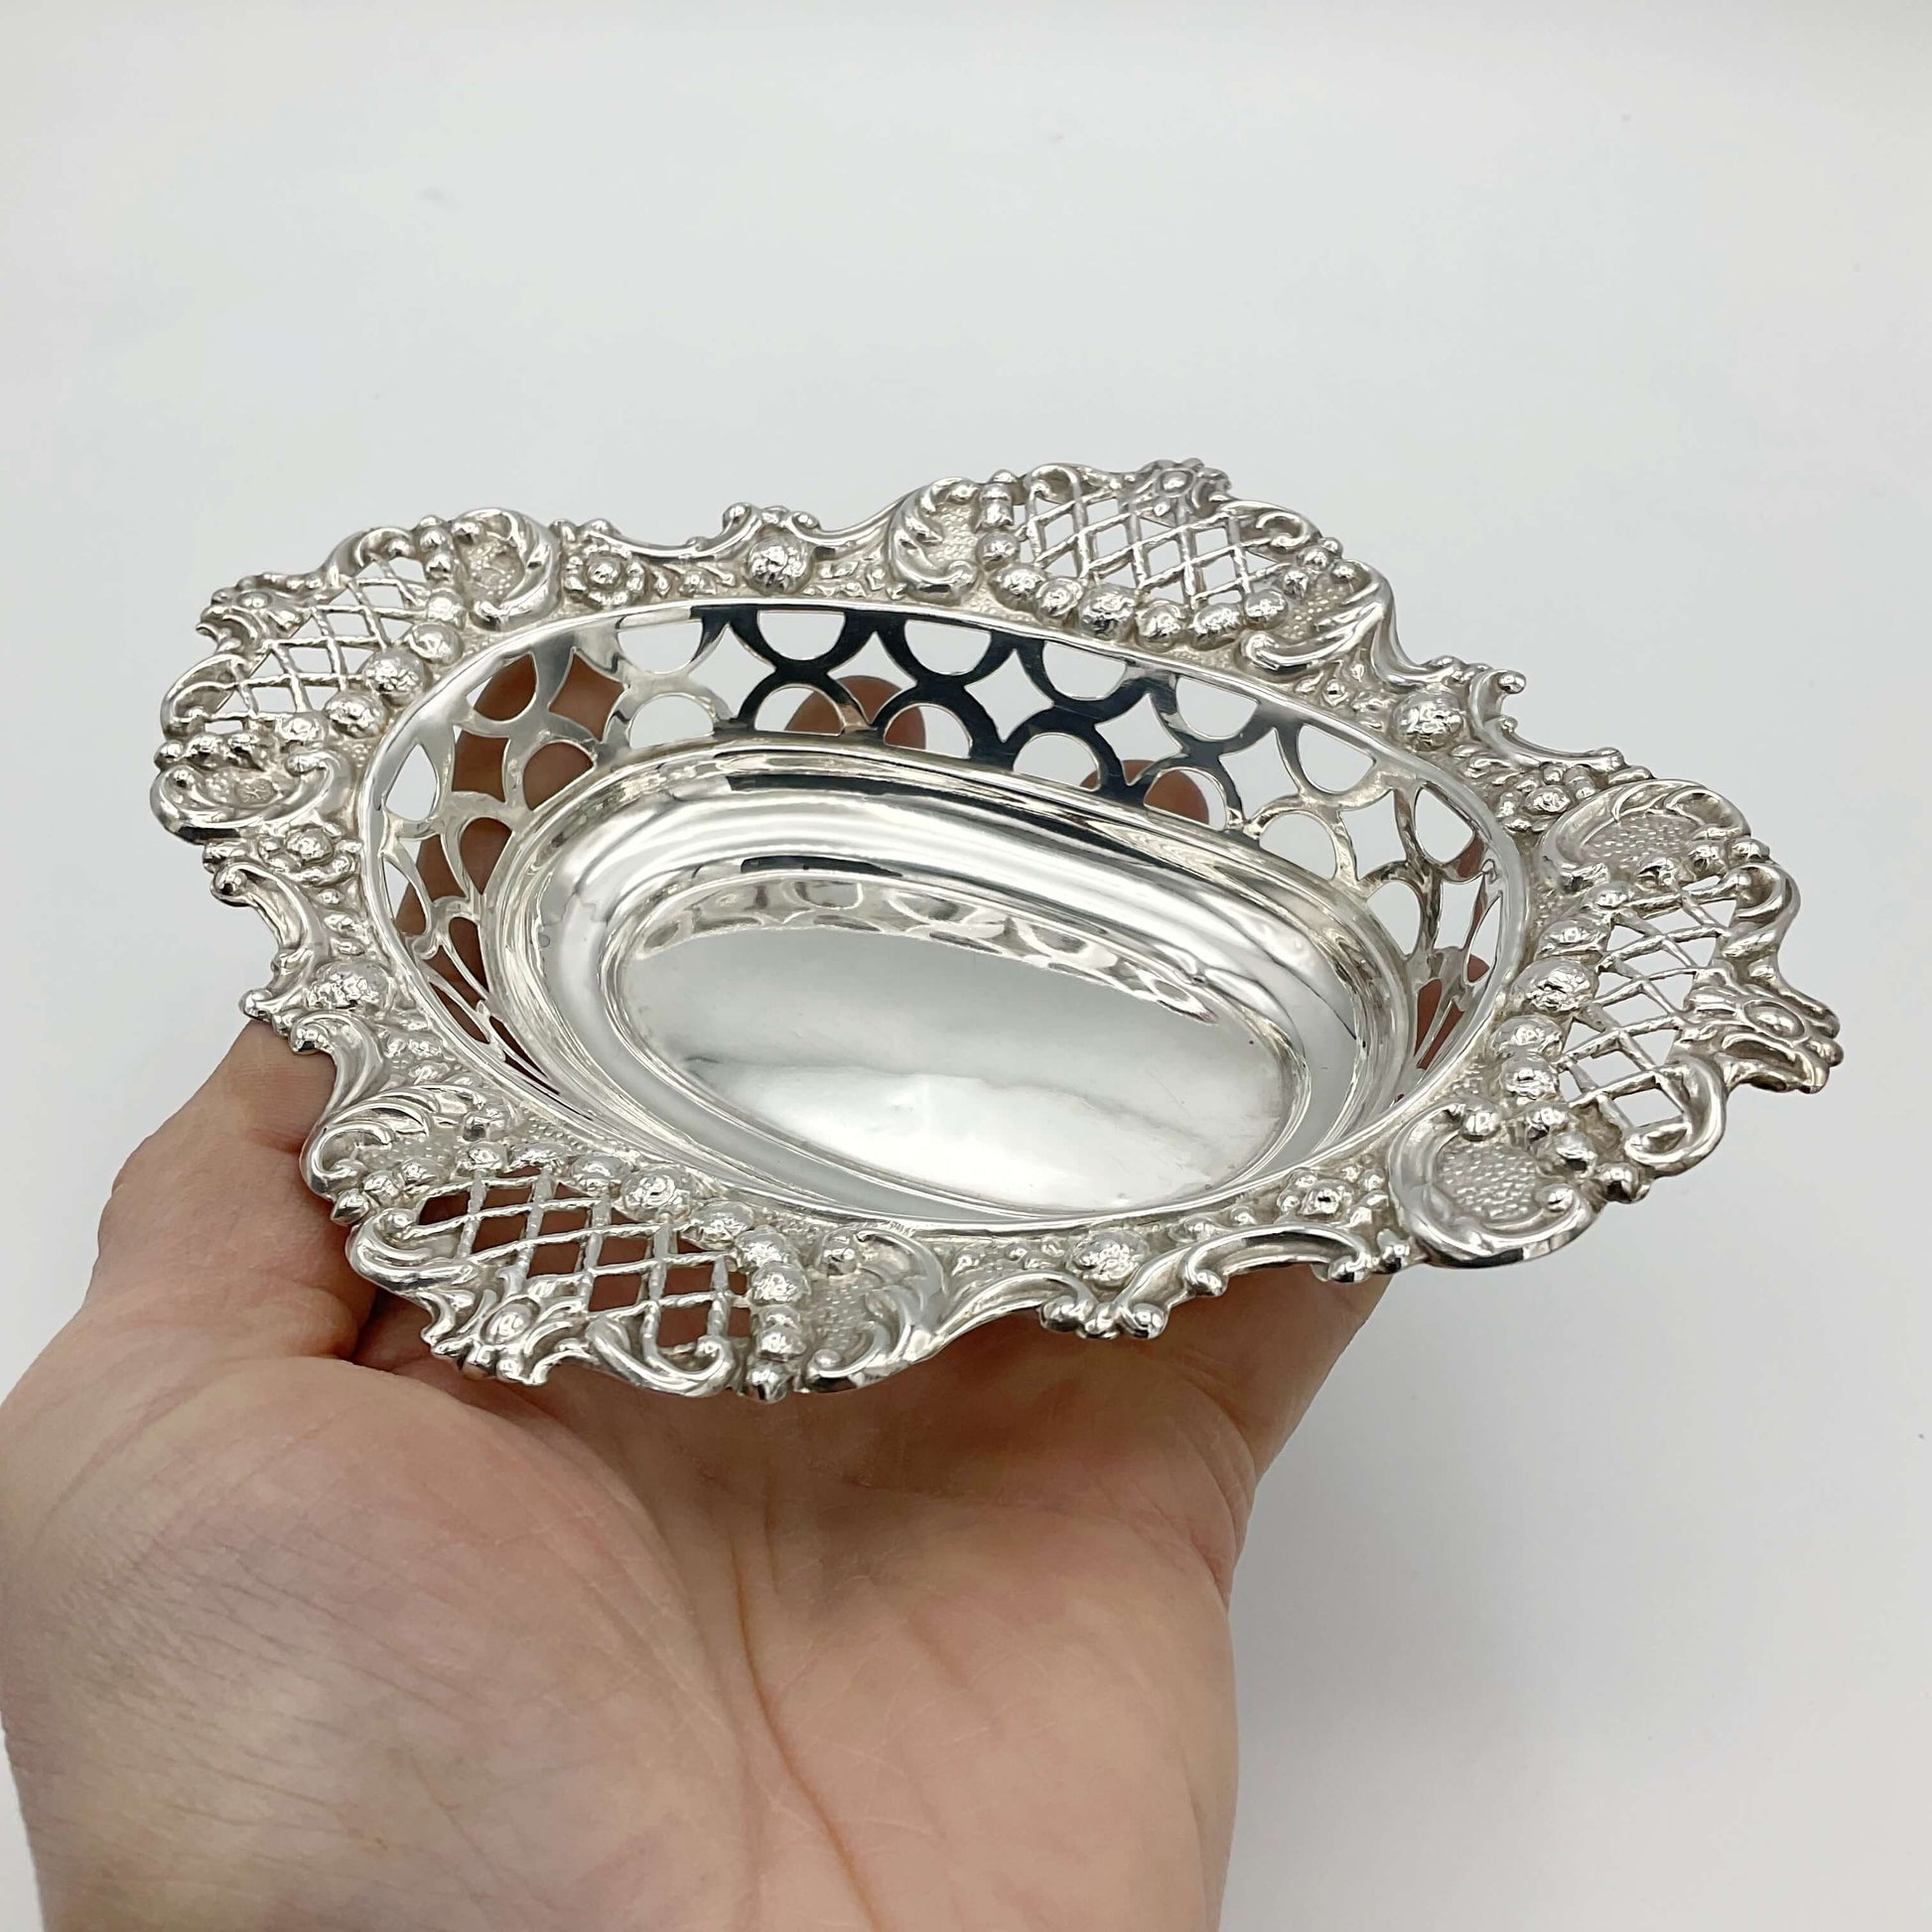 Beautiful detailing shown on the silver pierced bowl held in a hand